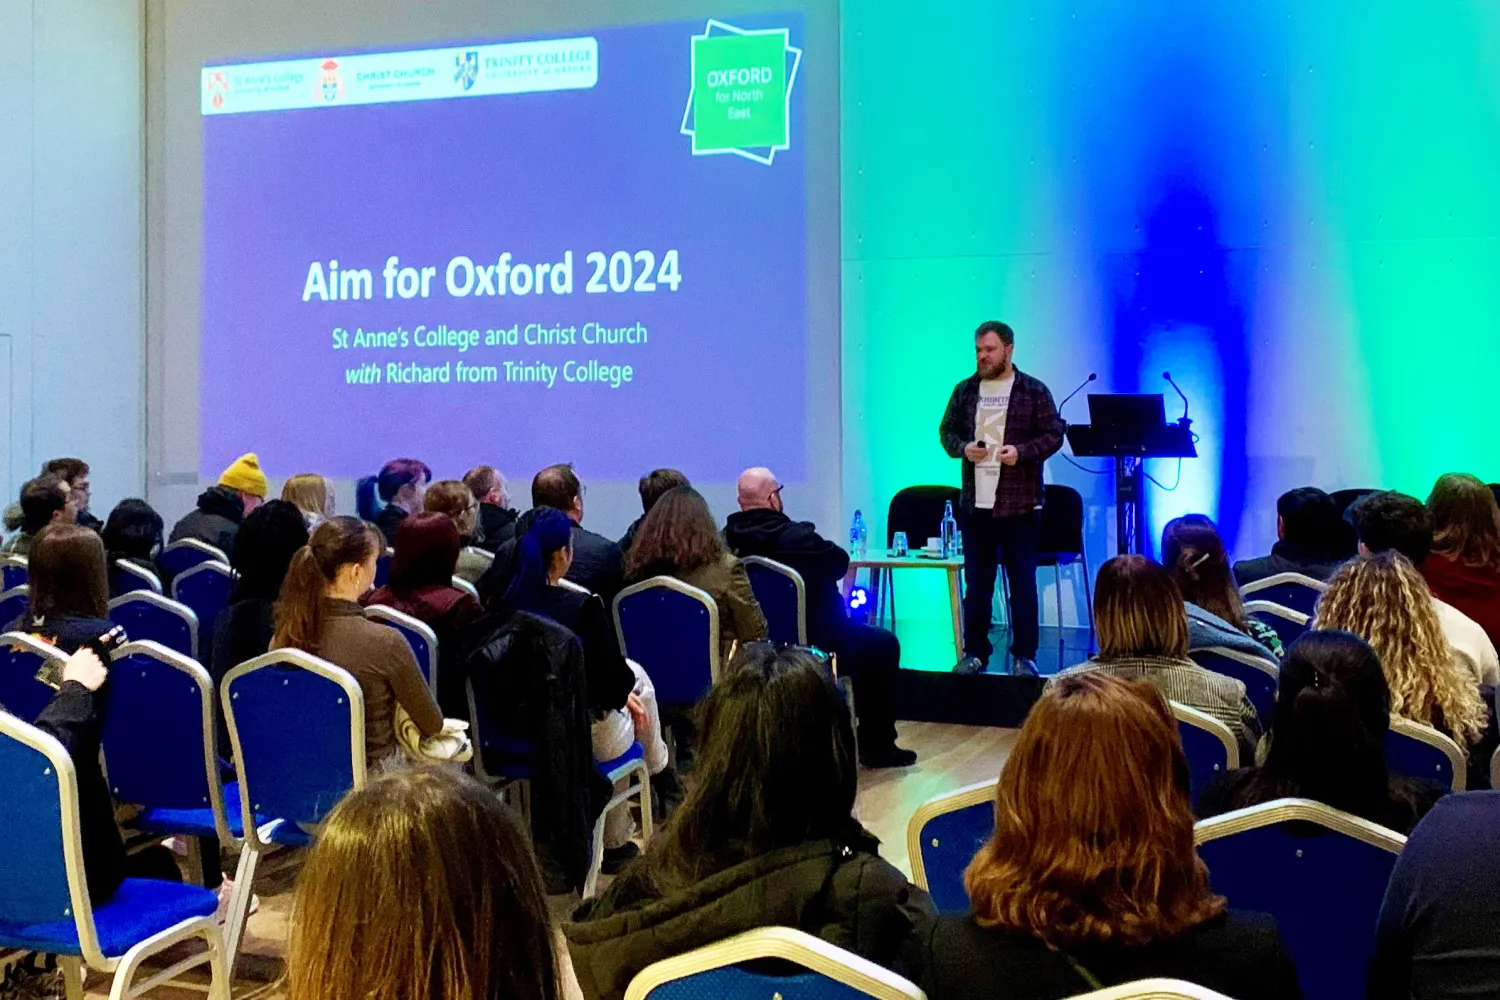 The Aim for Oxford launch event in Newcastle